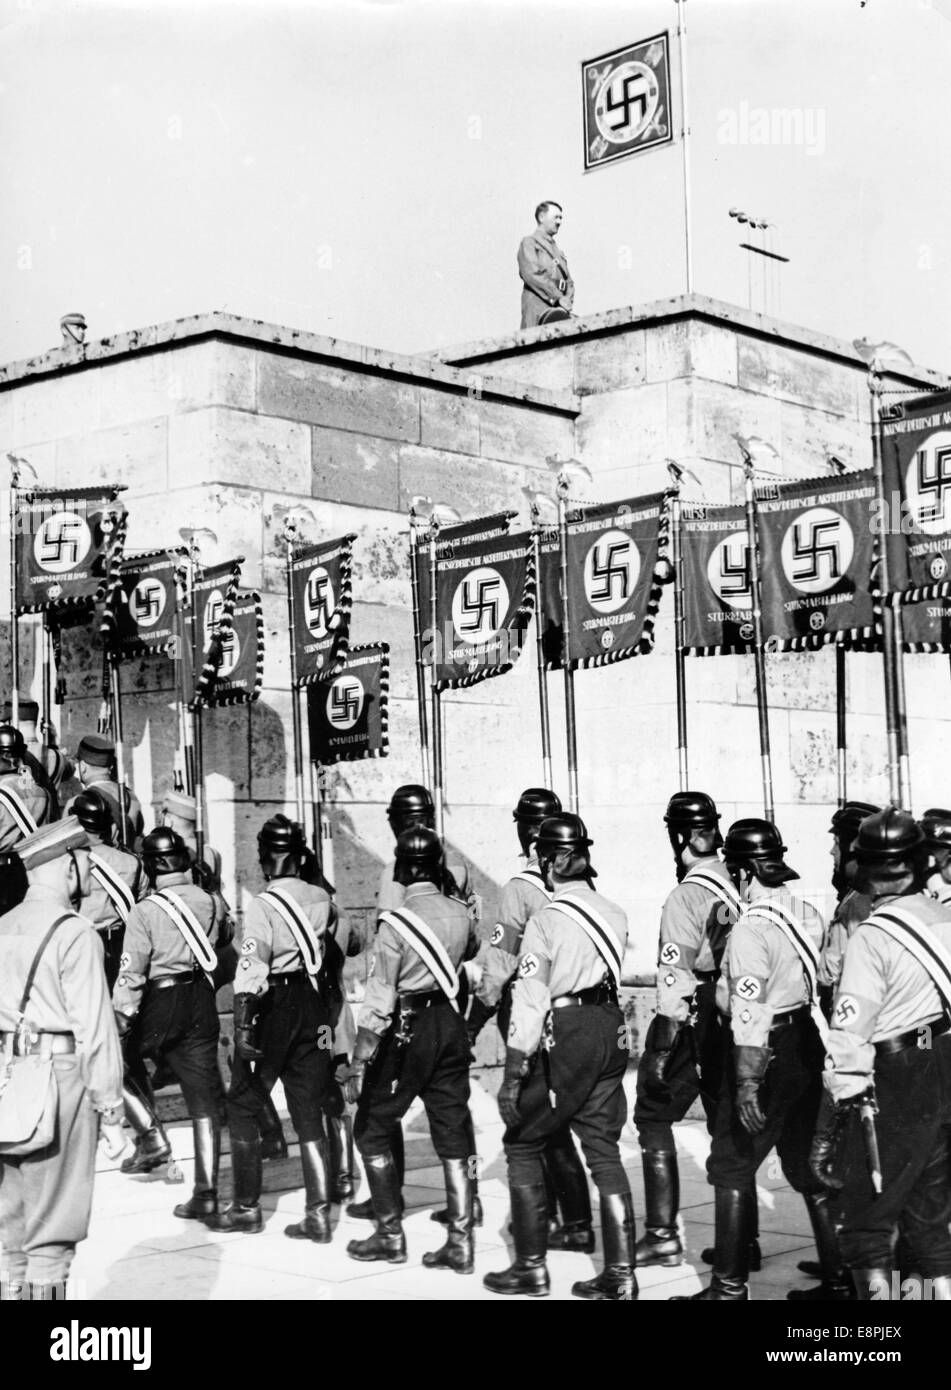 Nuremberg Rally 1938 in Nuremberg, Germany - March-past of the standards past Adolf Hitler and their setting up on the grandstand for the great roll call of the Sturmtruppe (SA), Schutzstaffel (SS), National Socialist Motor Corps (NSKK) and National Socialist Flyers Corps (NSFK) at Puitpoldarena at the Nazi party rally grounds. (Flaws in quality due to the historic picture copy) Fotoarchiv für Zeitgeschichtee - NO WIRE SERVICE - Stock Photo